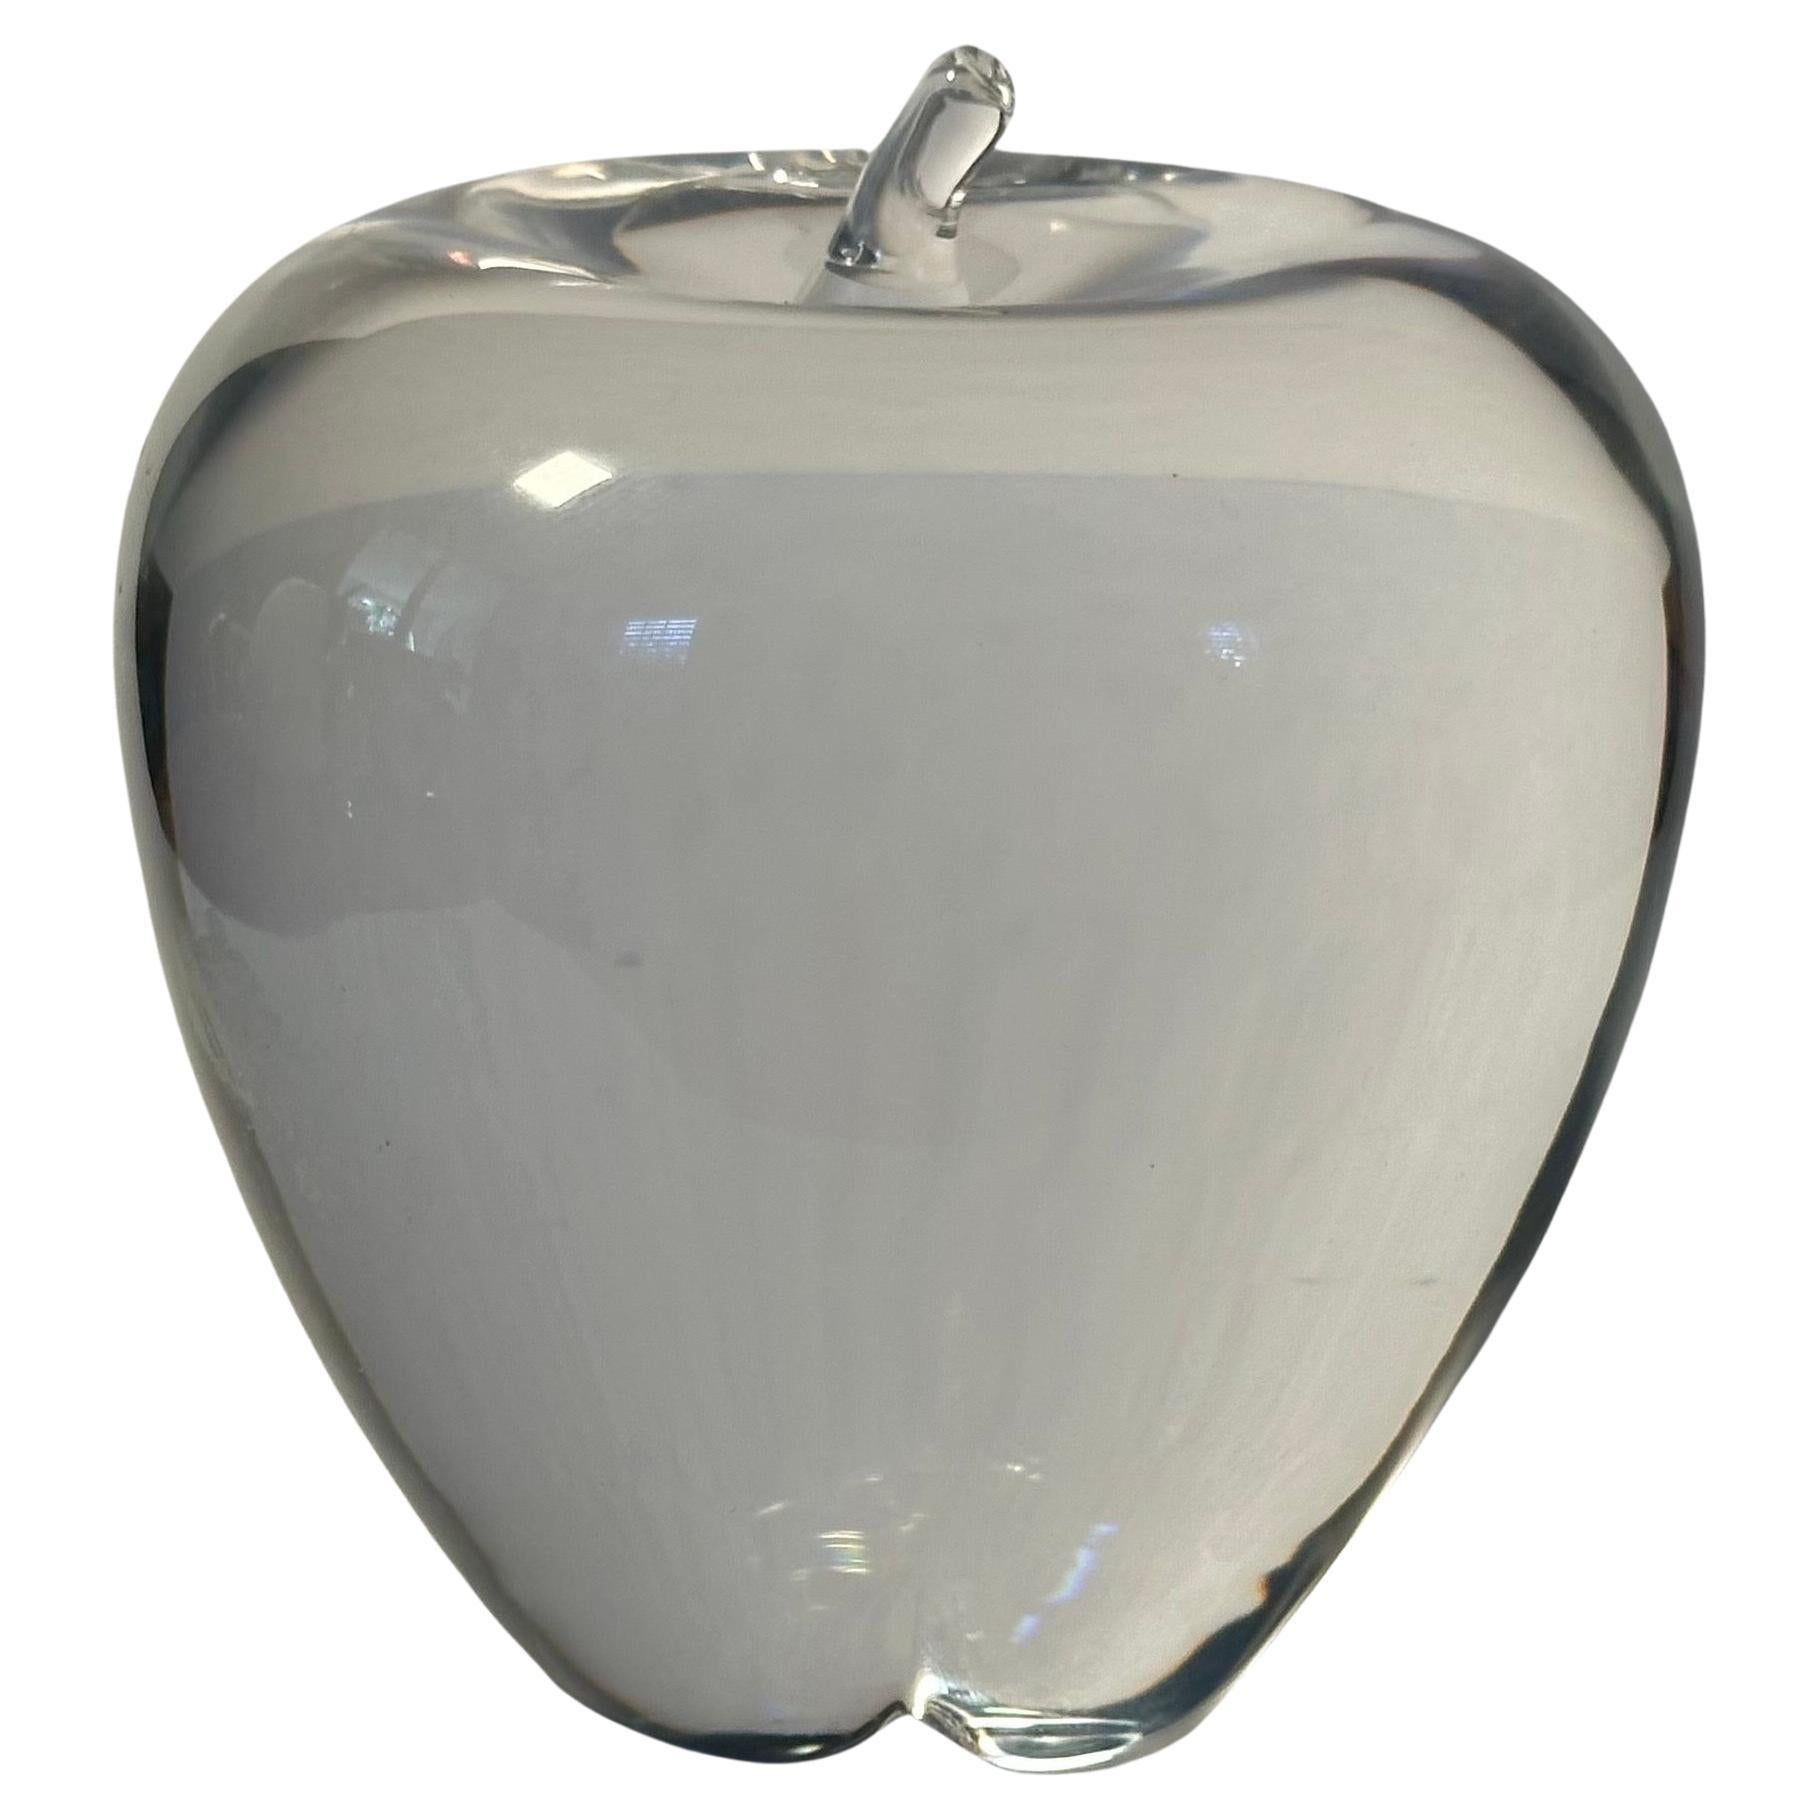 Crystal Apple Sculpture / Paper Weight by Steuben Glassworks For Sale